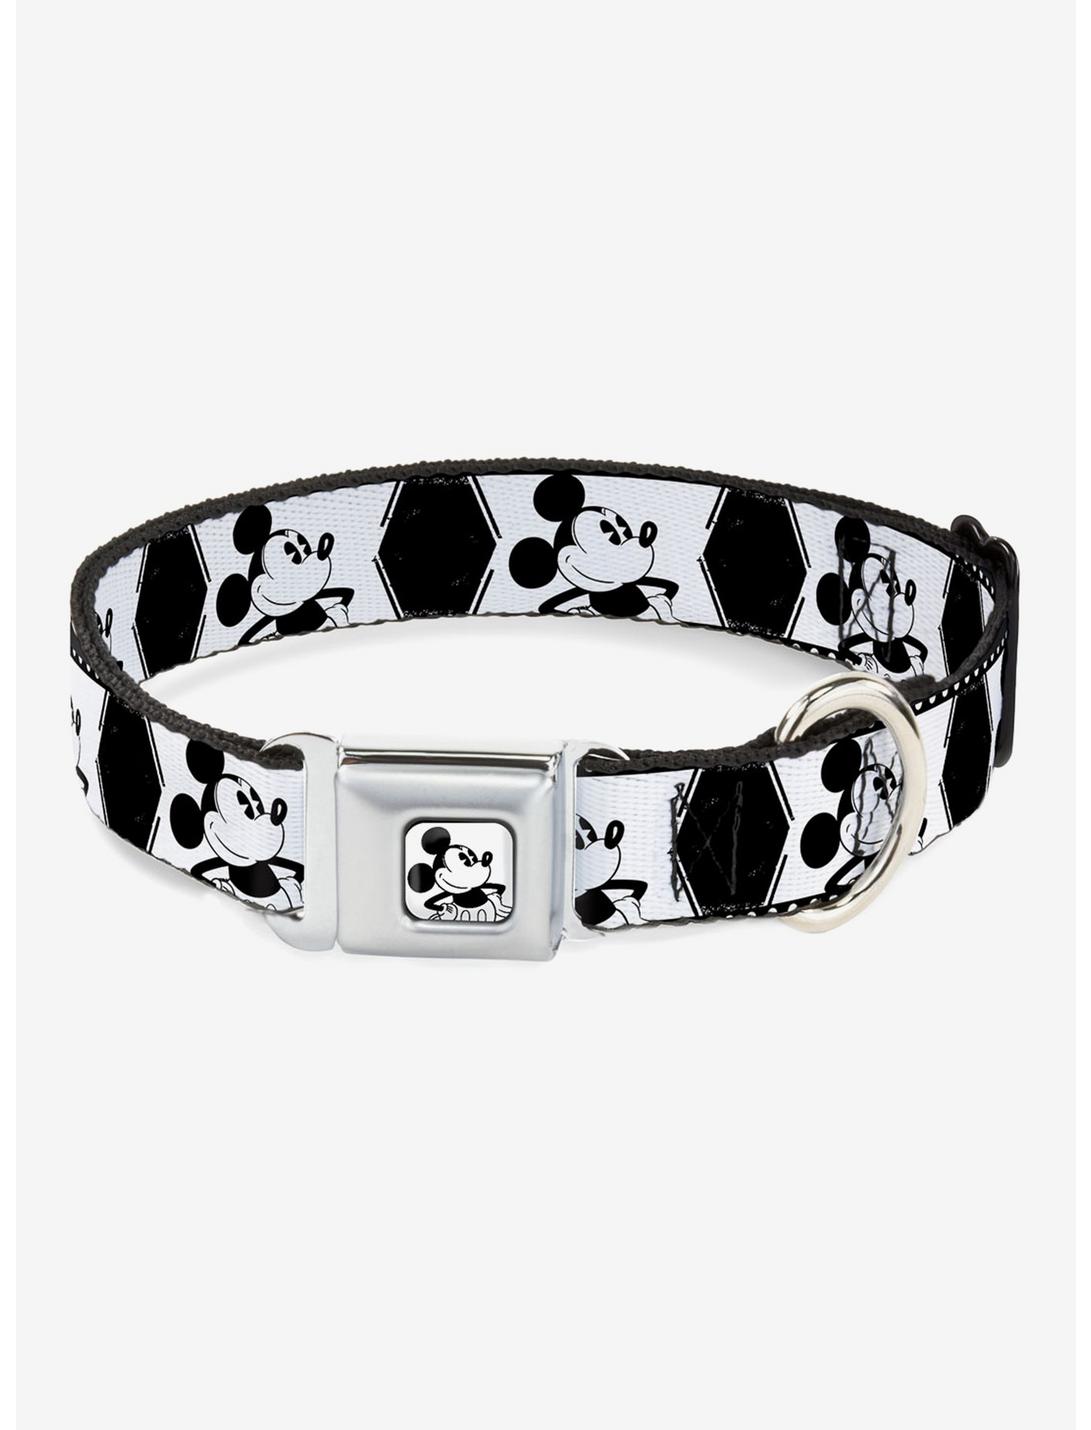 Disney Mickey Mouse Standing Pose Seatbelt Buckle Dog Collar, MULTICOLOR, hi-res